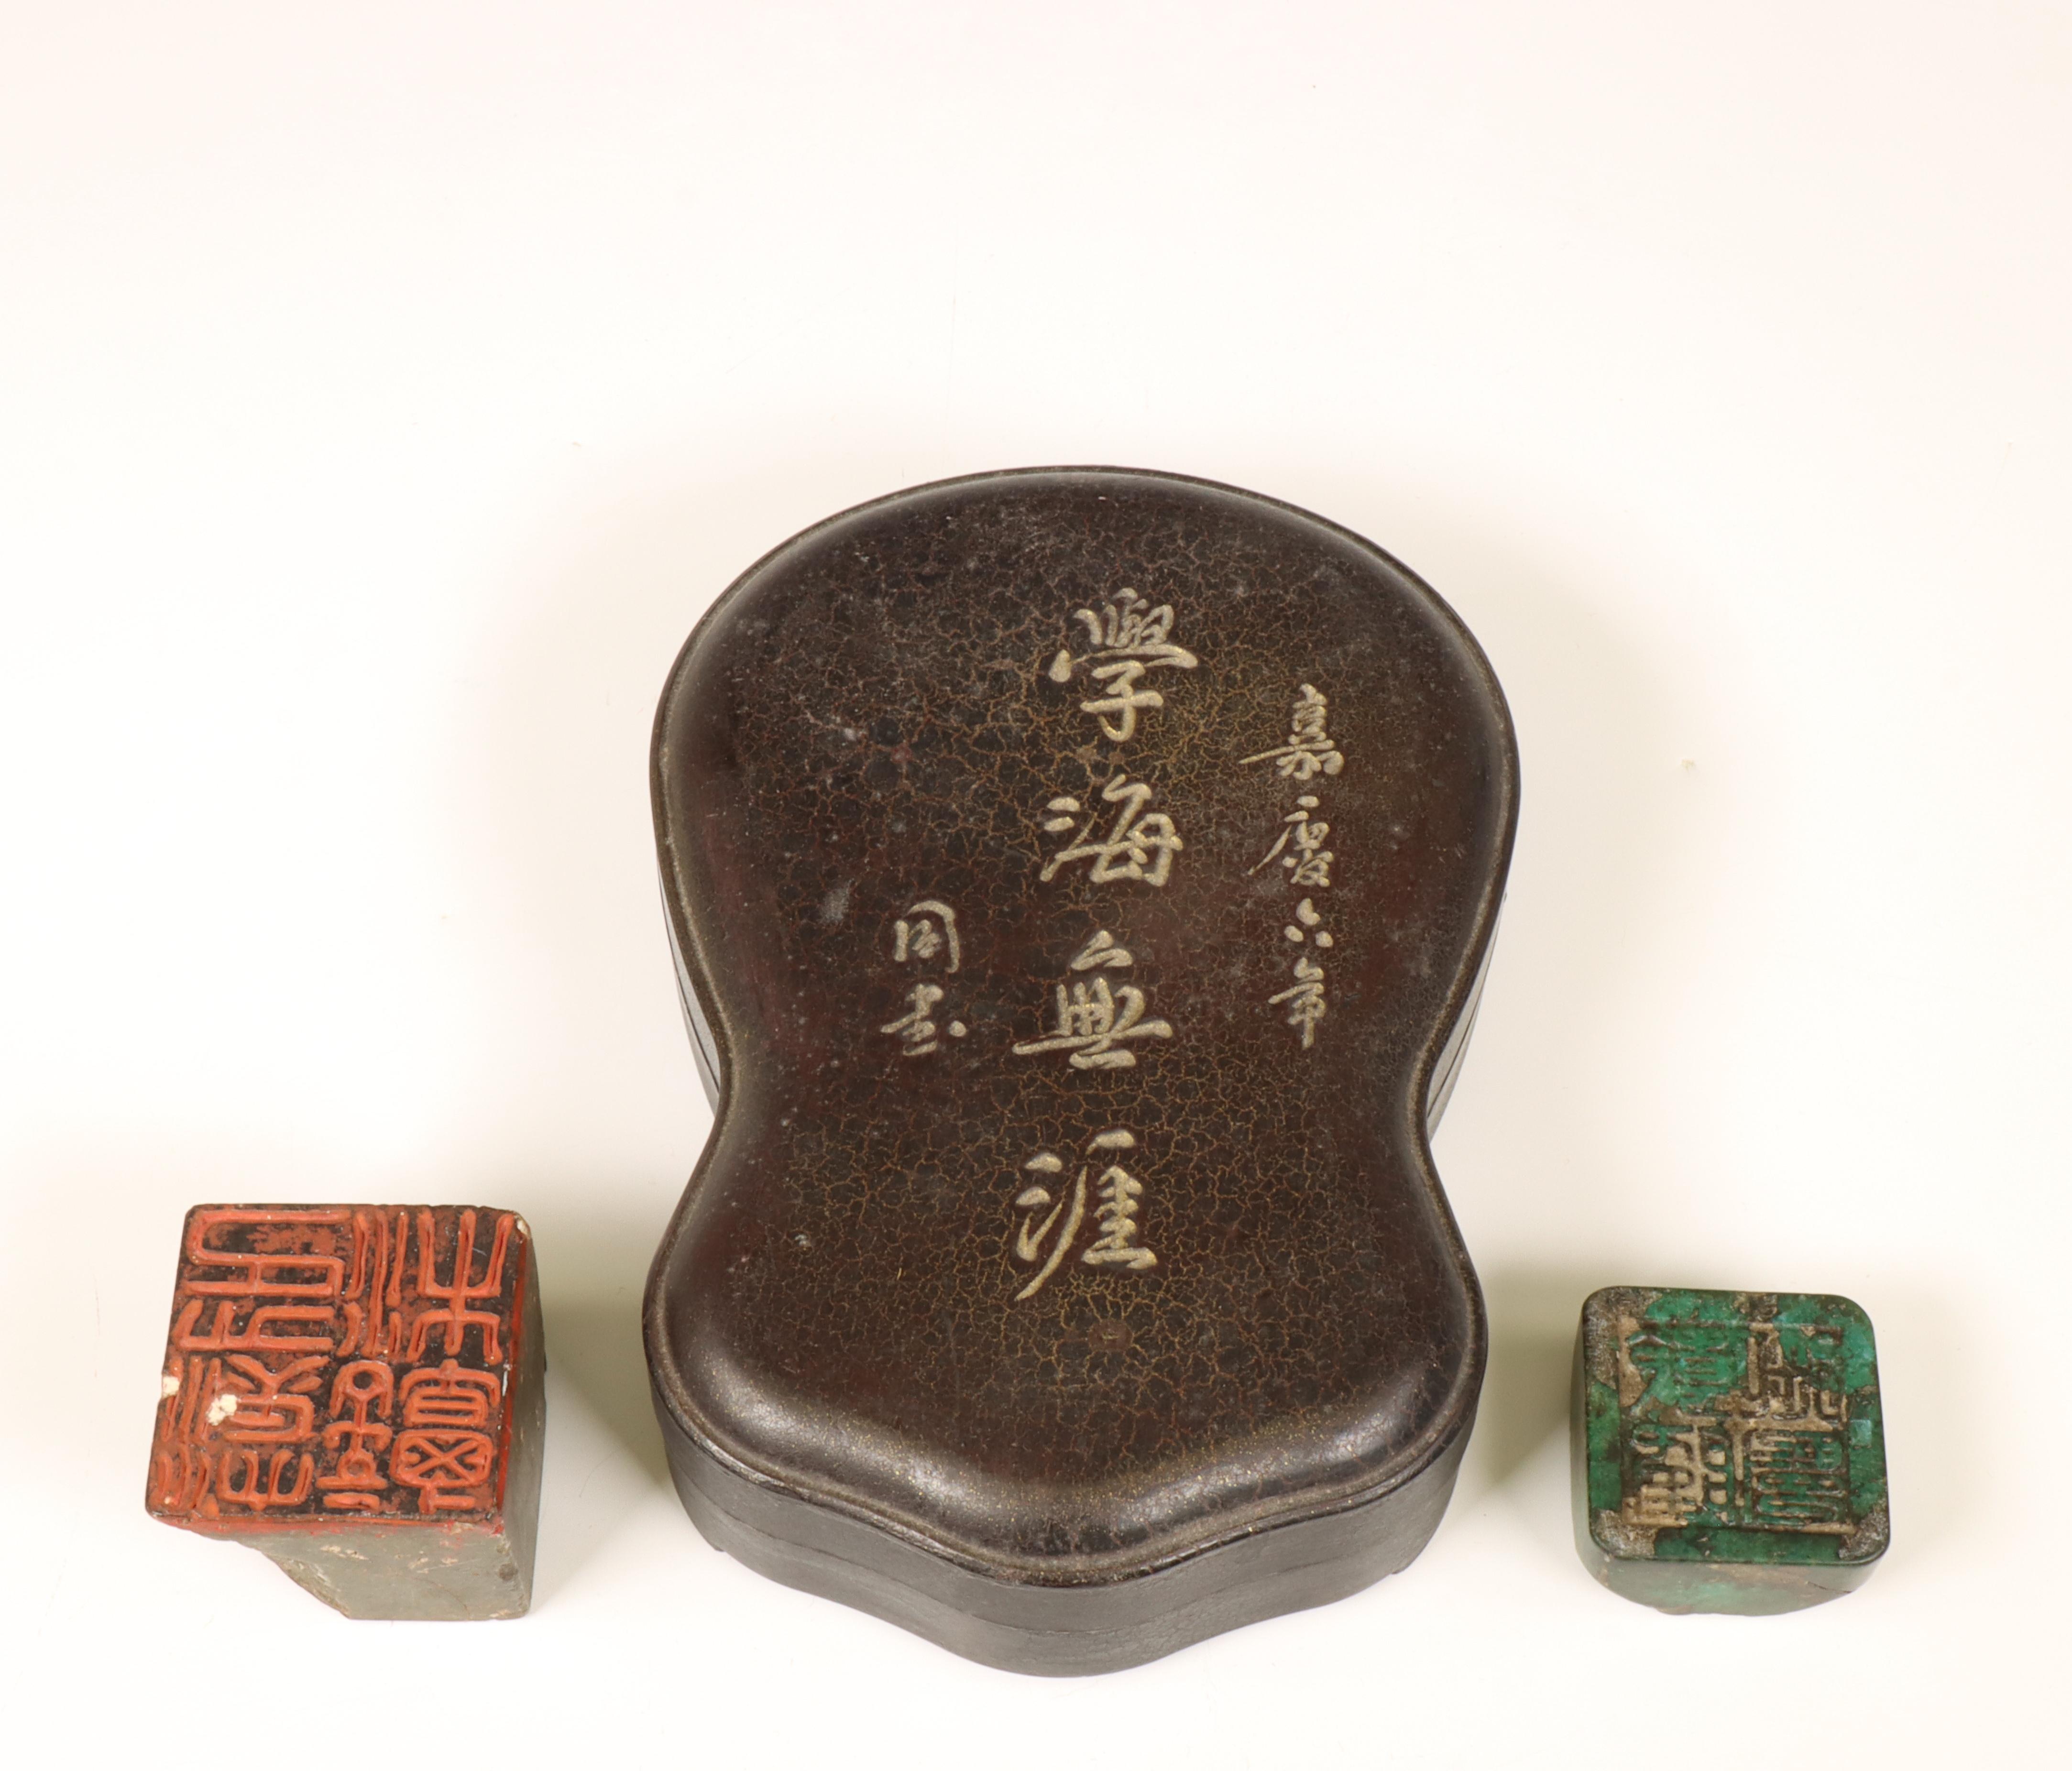 China, two stone seals and an ink stone, ca. 1900,